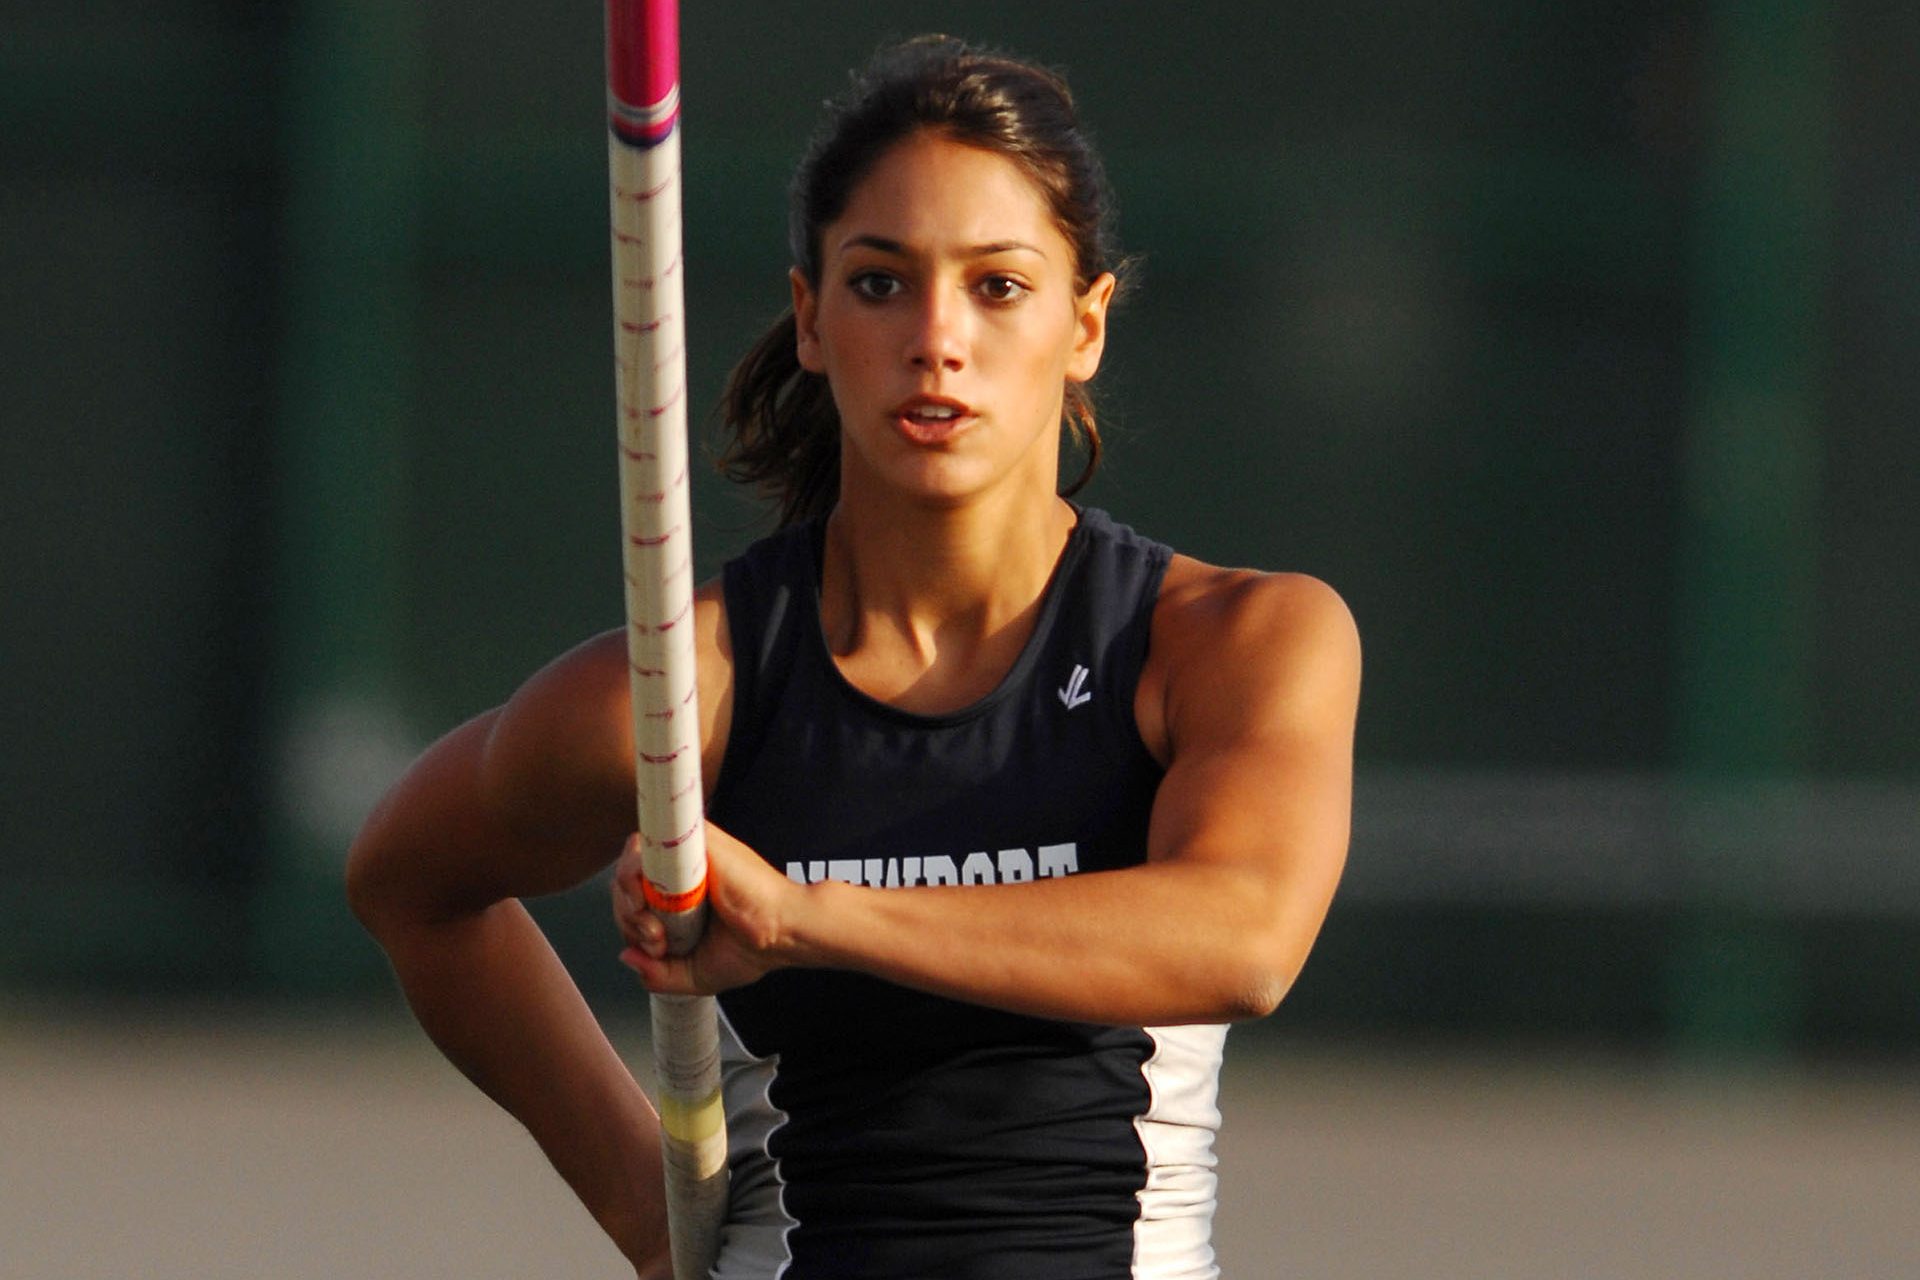 Allison Stokke and the photo that ruined her career